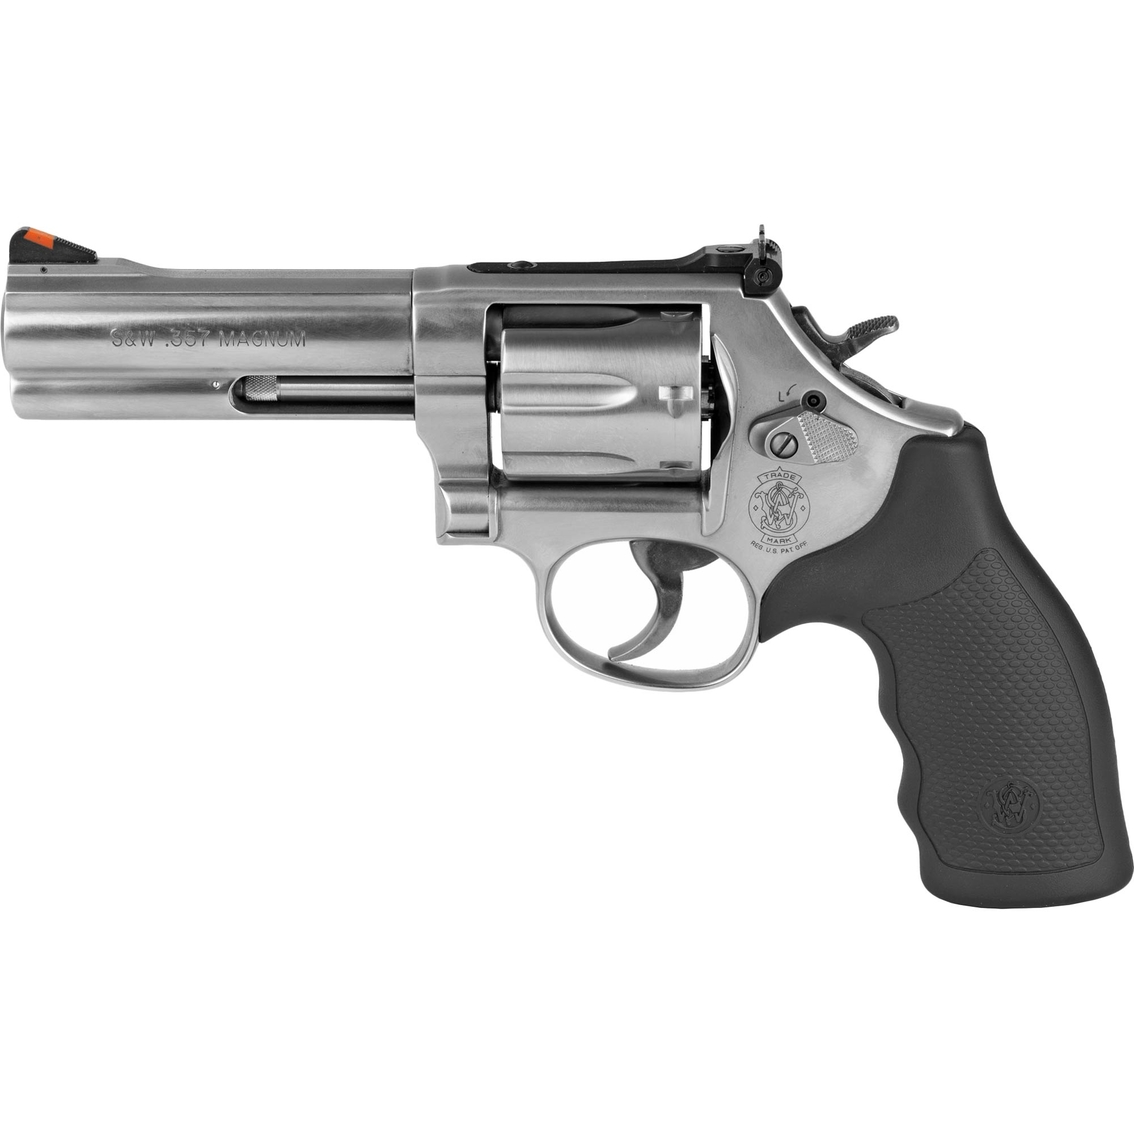 S&W 686 Plus 357 Mag 4.125 in. Barrel 7 Rds Revolver Stainless Steel - Image 2 of 3